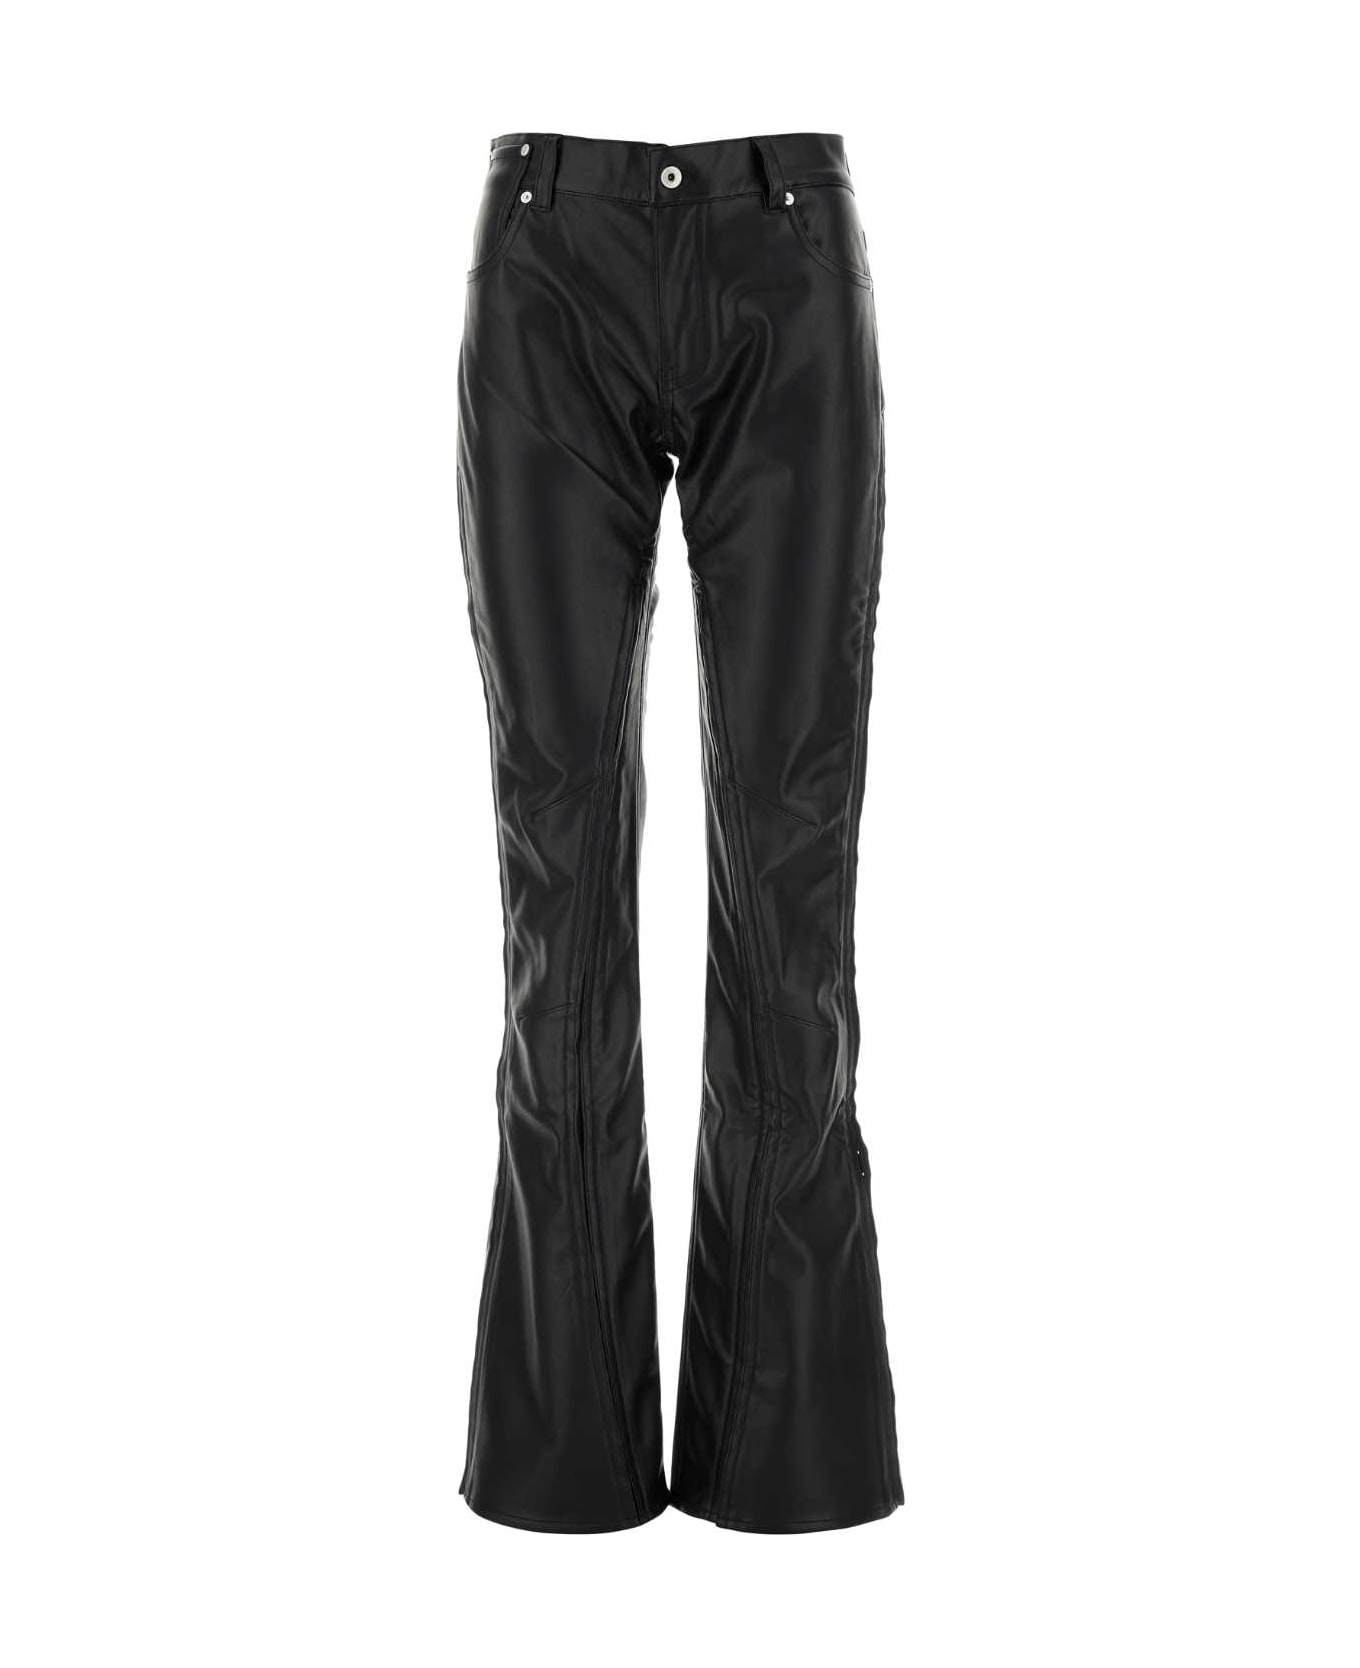 Y/Project Black Synthetic Leather Pant - BLACK